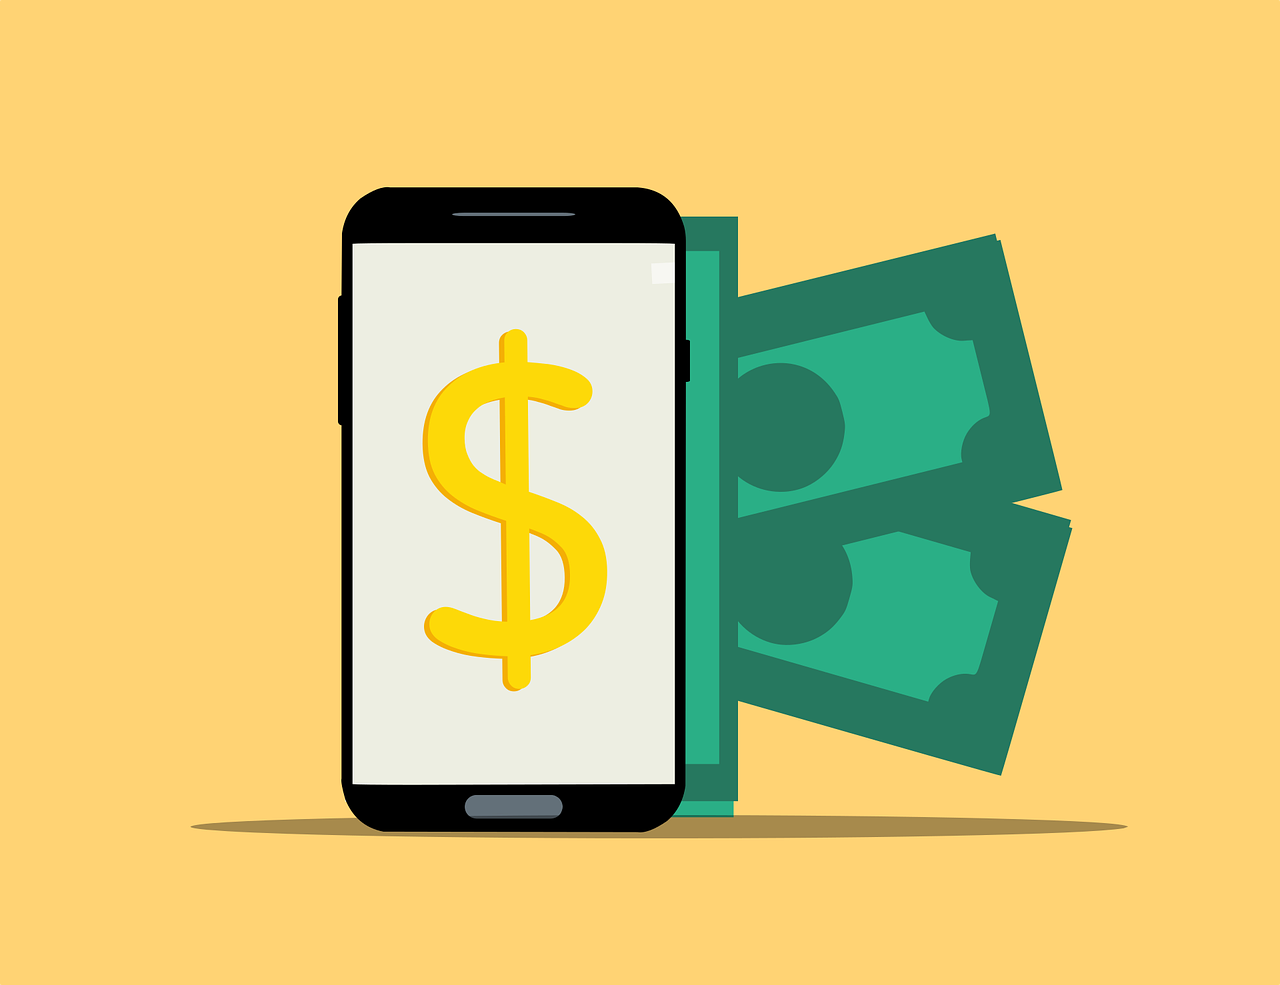 Mobile money: finding security risks for investment opportunities